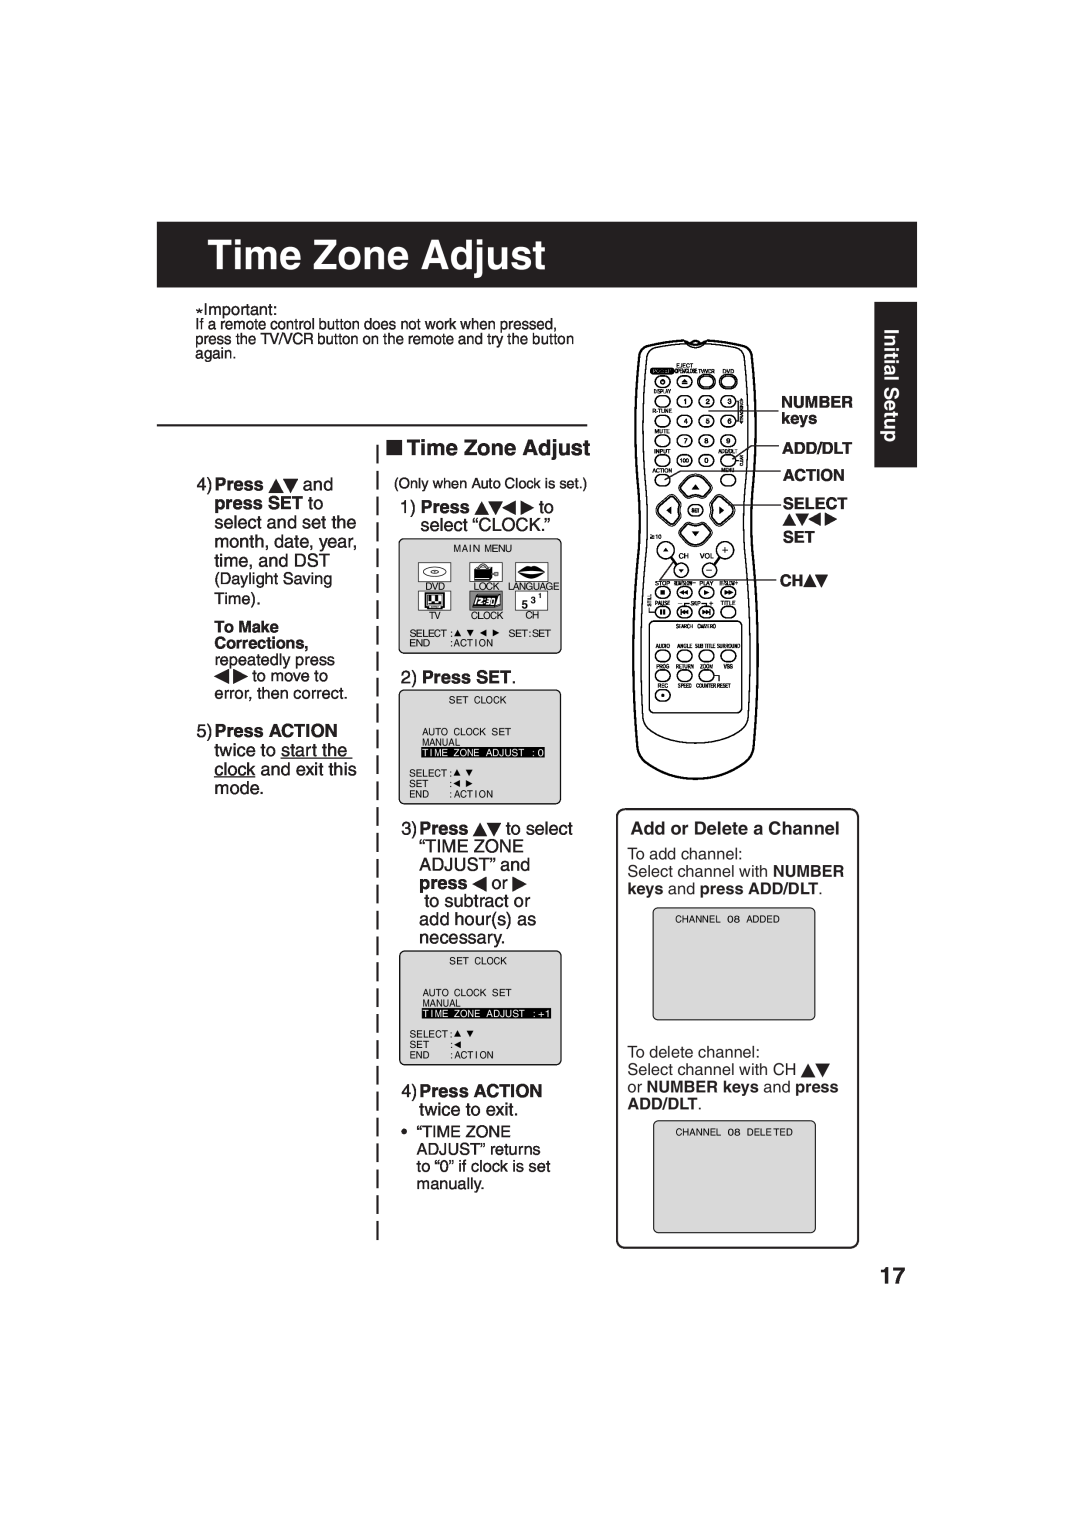 Panasonic PV-DF273 Time Zone Adjust, Initial Setup, Press ACTION twice to start the clock and exit this mode, NUMBER keys 